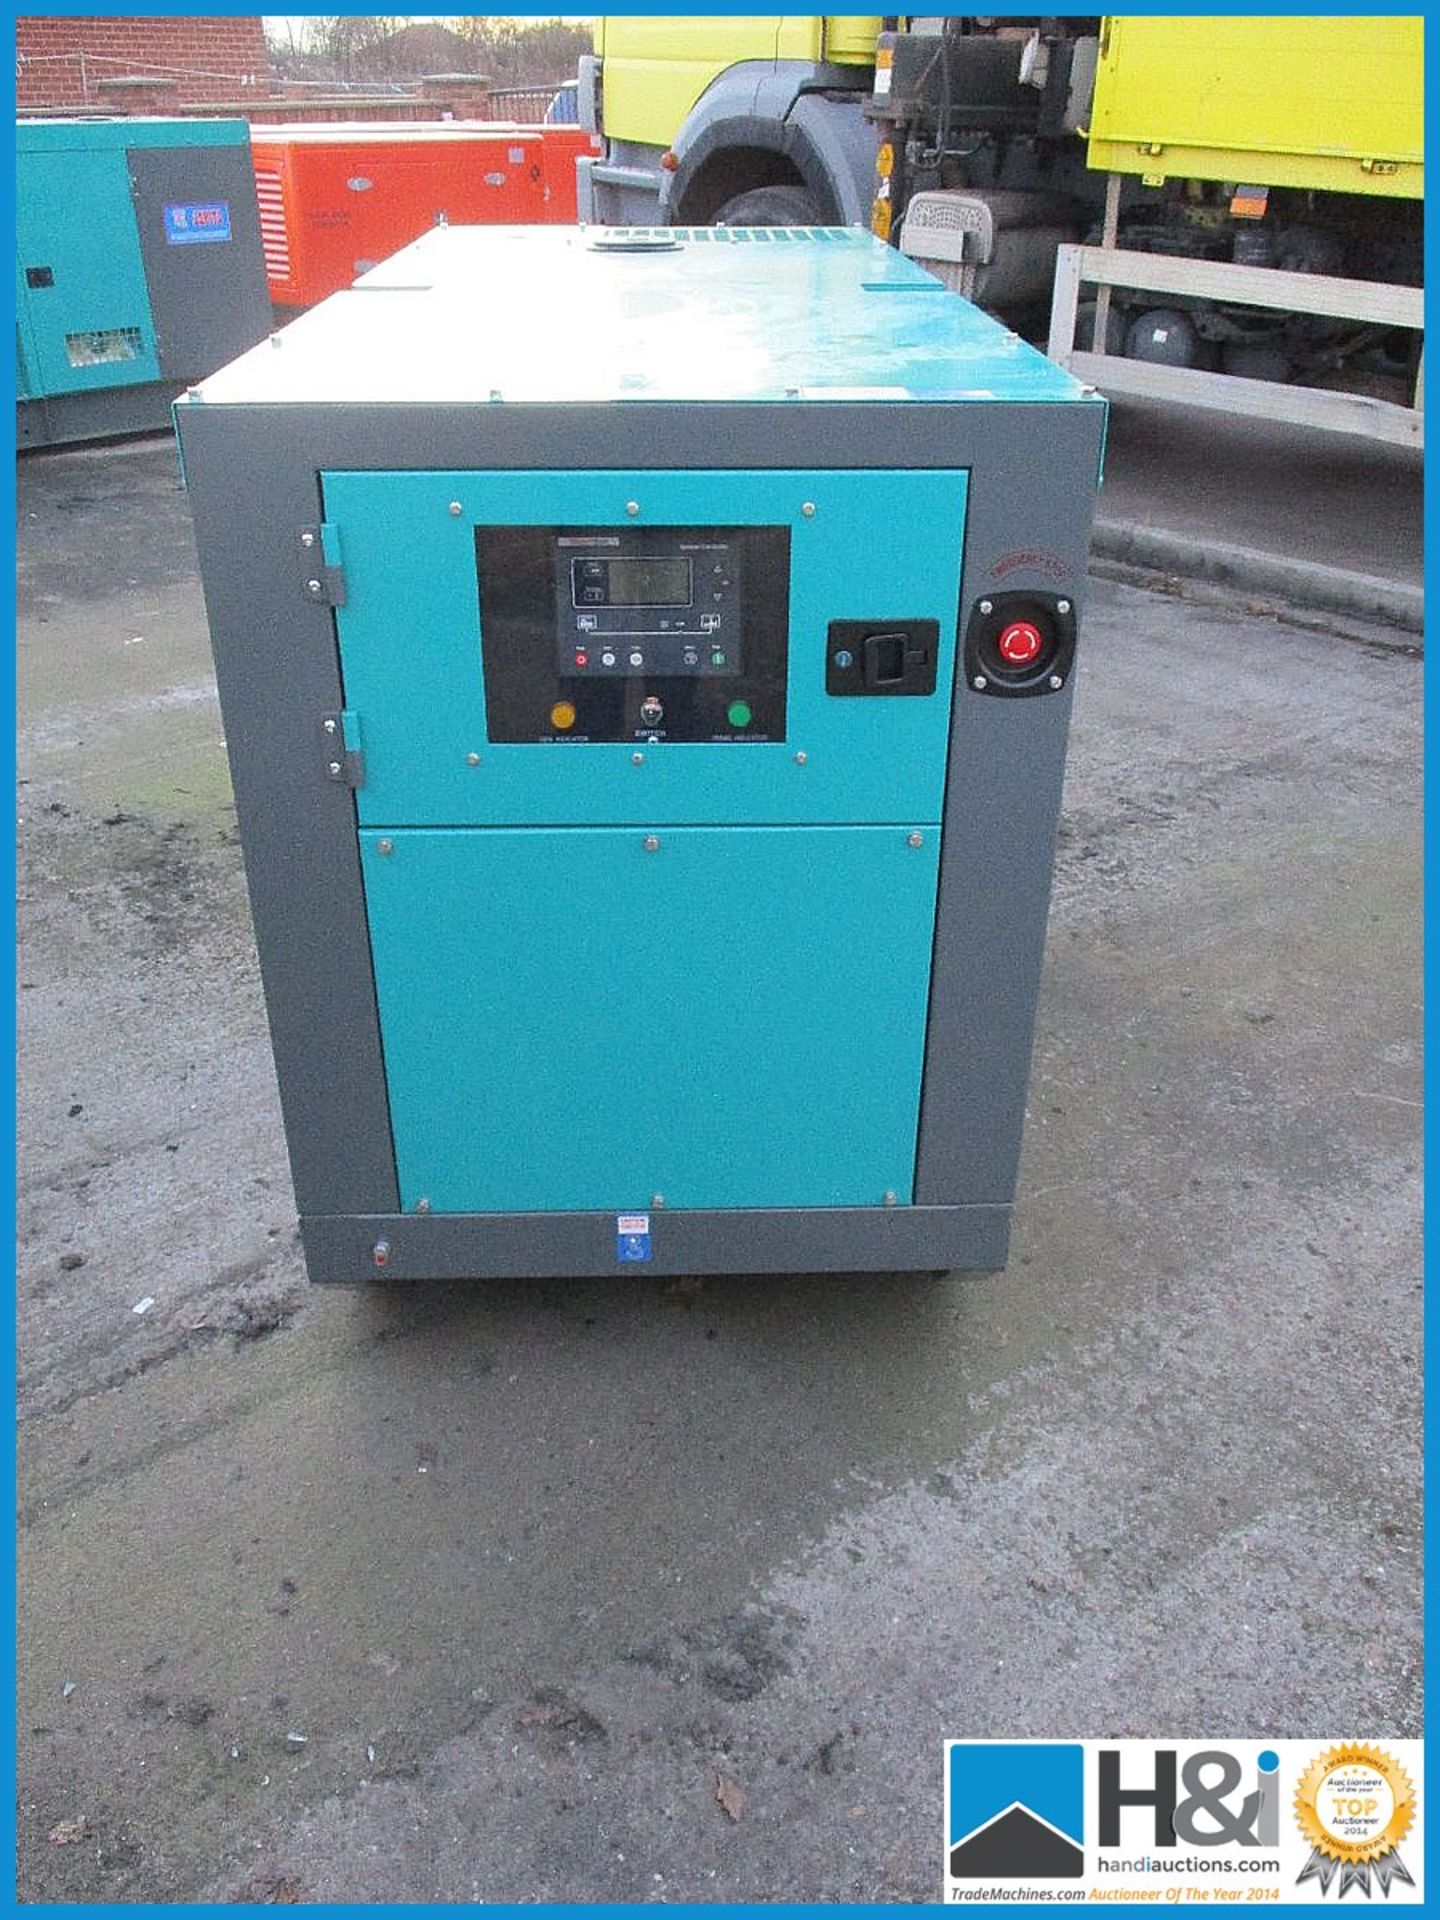 Brand new, unused Ashita AG3-40SBG 30KvA generator. No oil or water and ready for transportation. - Image 2 of 5